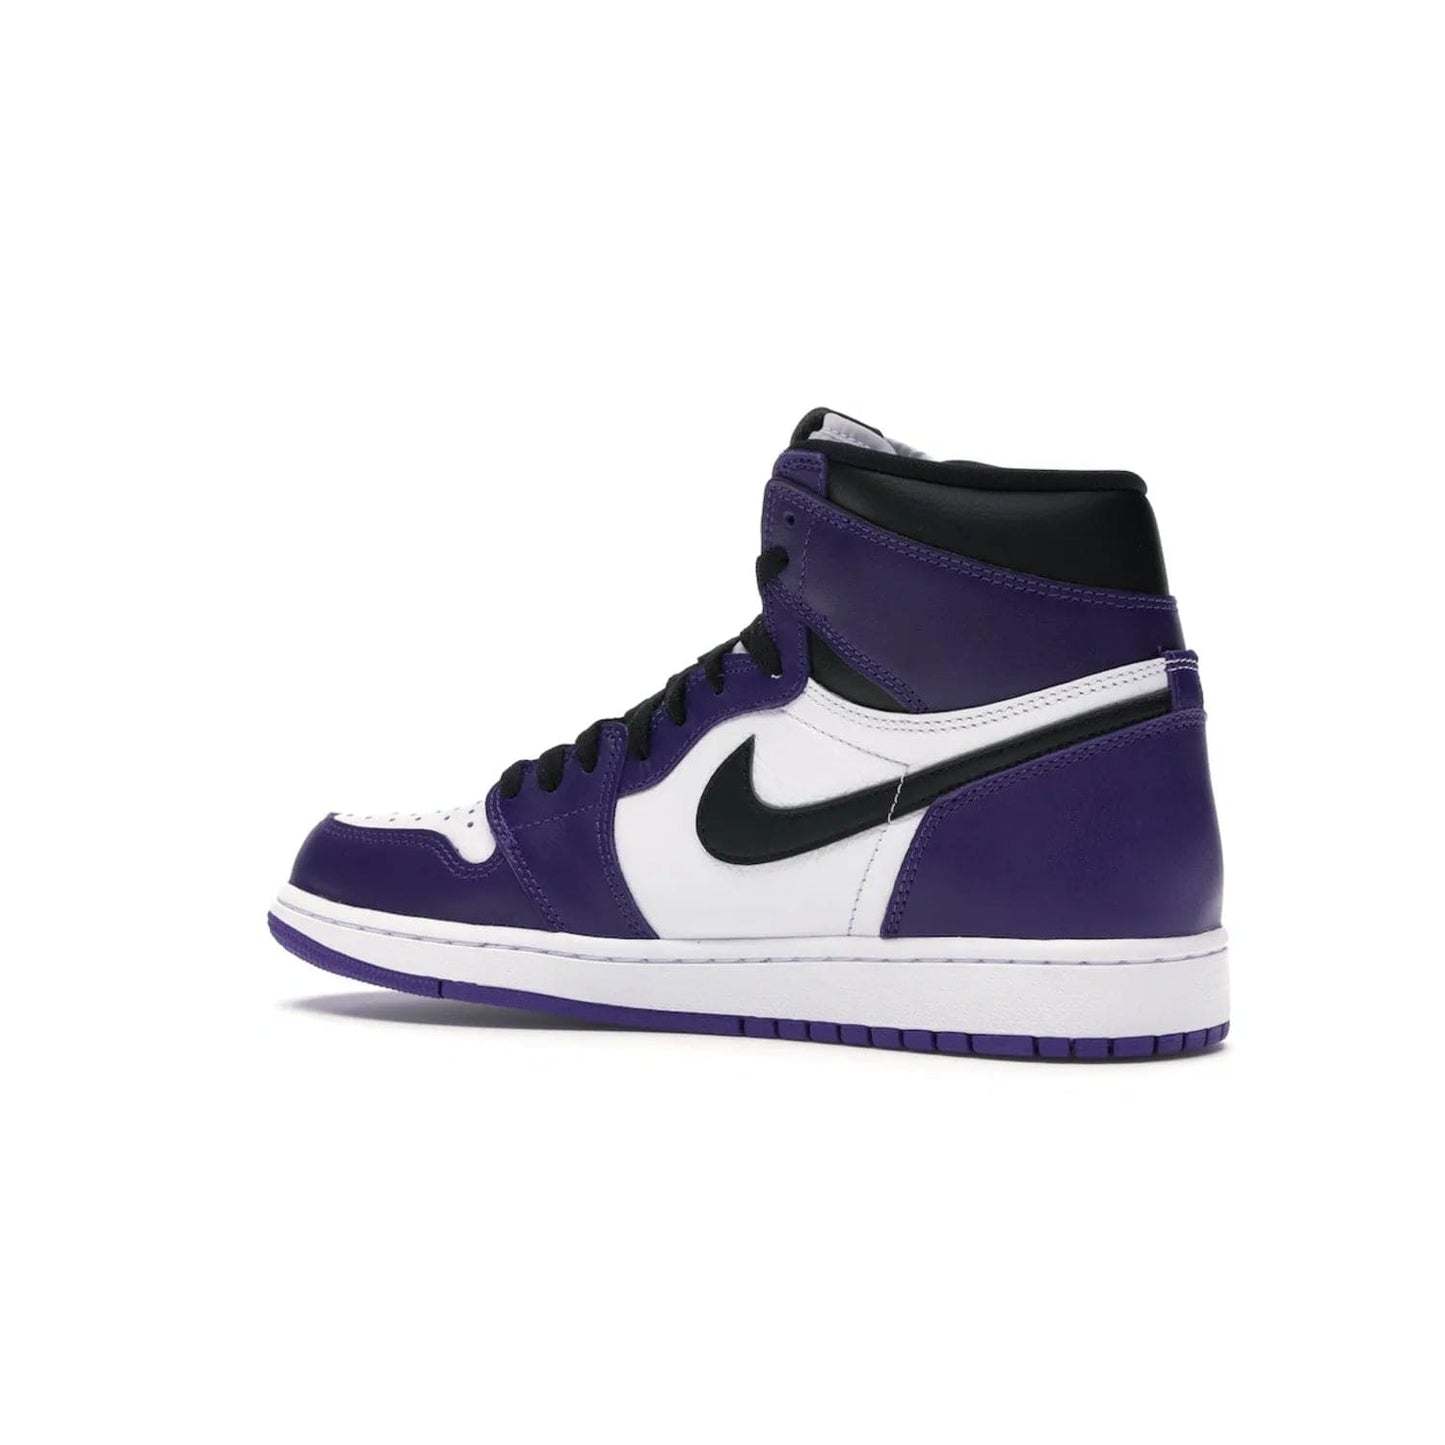 Jordan 1 Retro High Court Purple White - Image 22 - Only at www.BallersClubKickz.com - Grab the classic Jordan 1 Retro High Court Purple White and add major flavor to your collection. White leather upper with Court Purple overlays and Swoosh logo. White midsole and purple outsole. Get yours and rep your Jordan Brand.